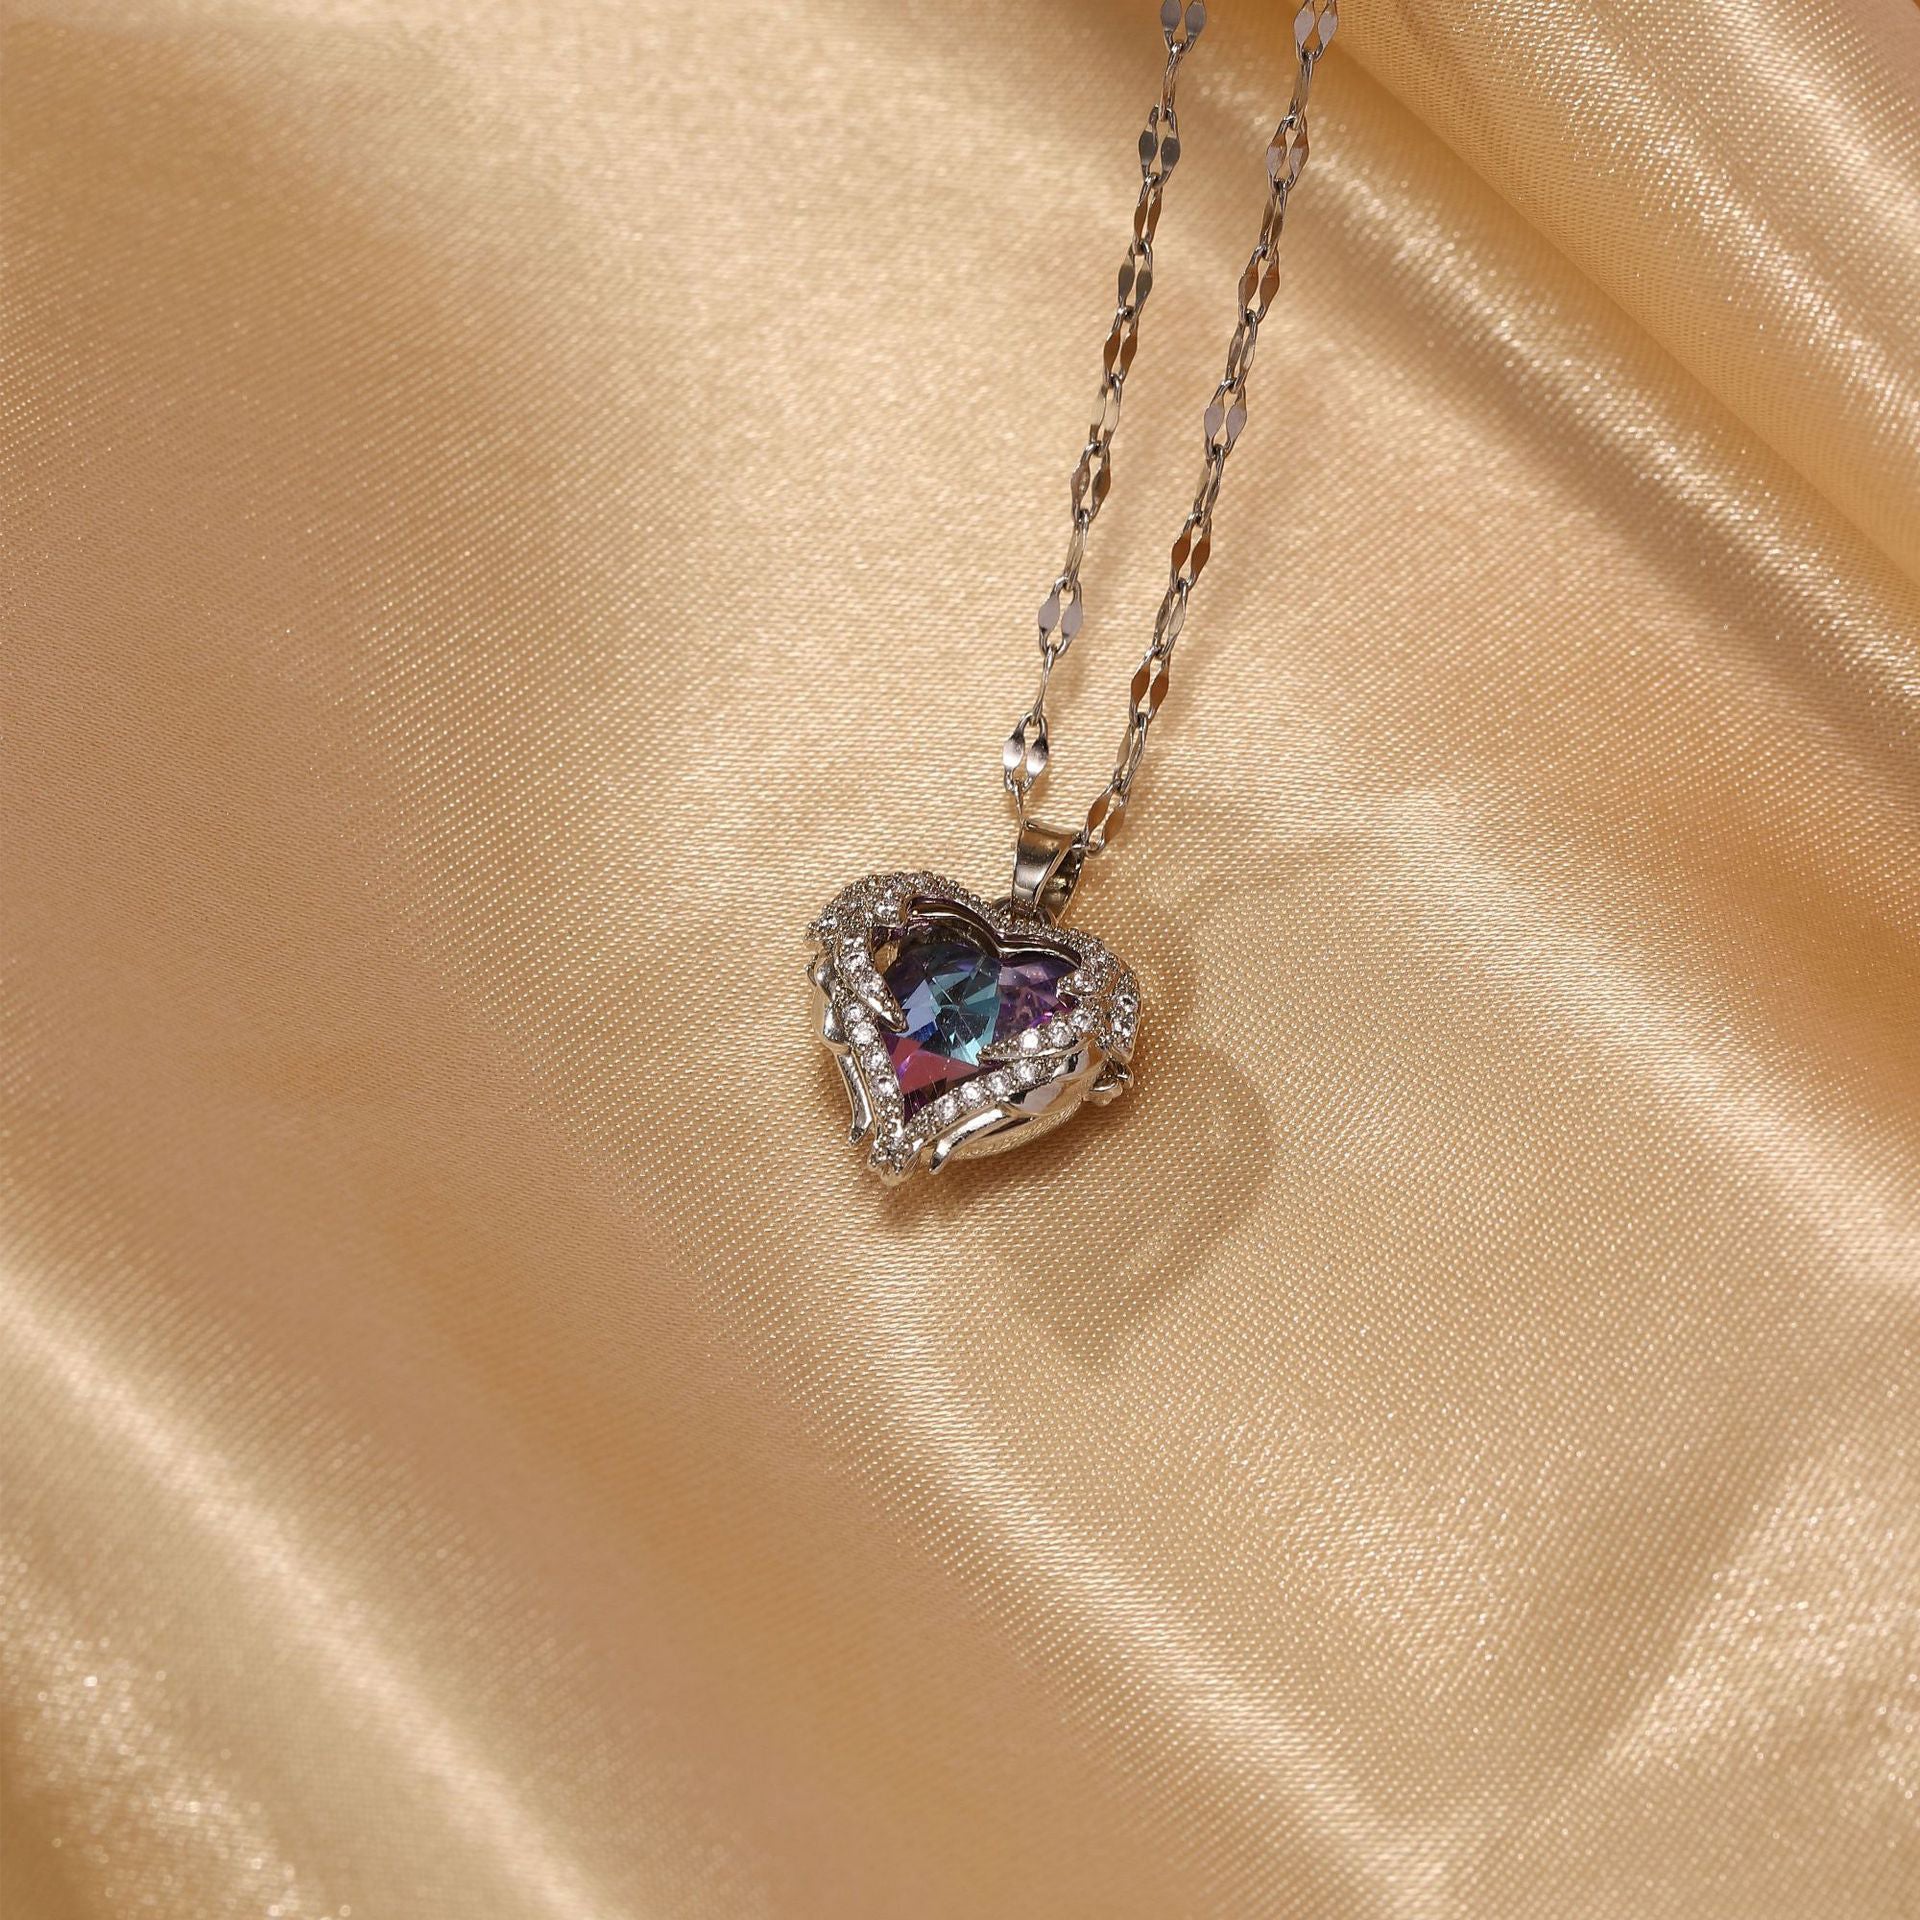 [miallo] Necklace N44 Love Shaped Crystal Necklace